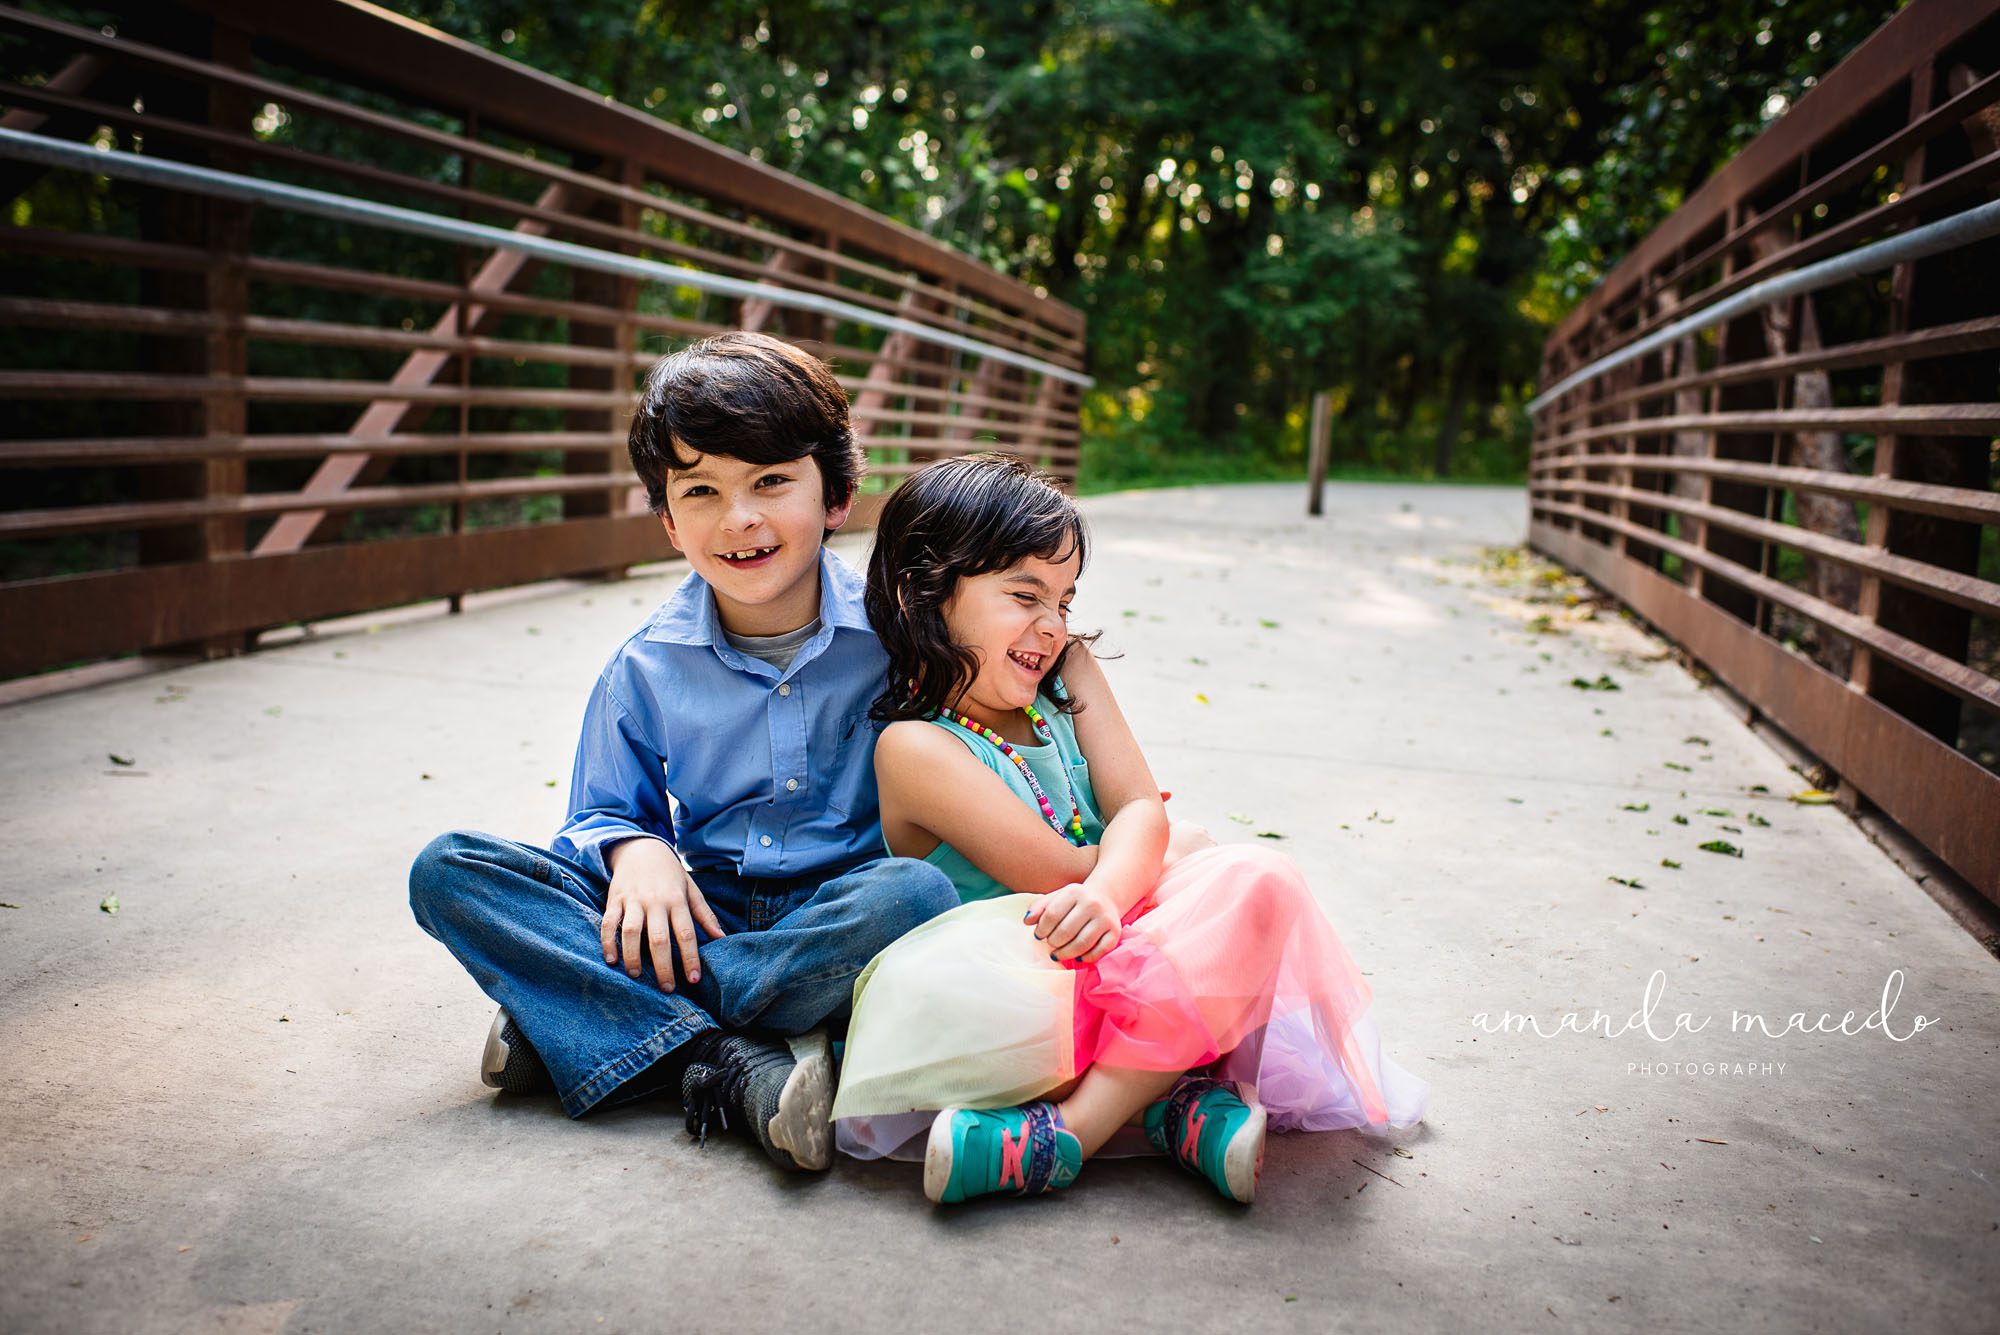 Child photographer, brother and sister laughing